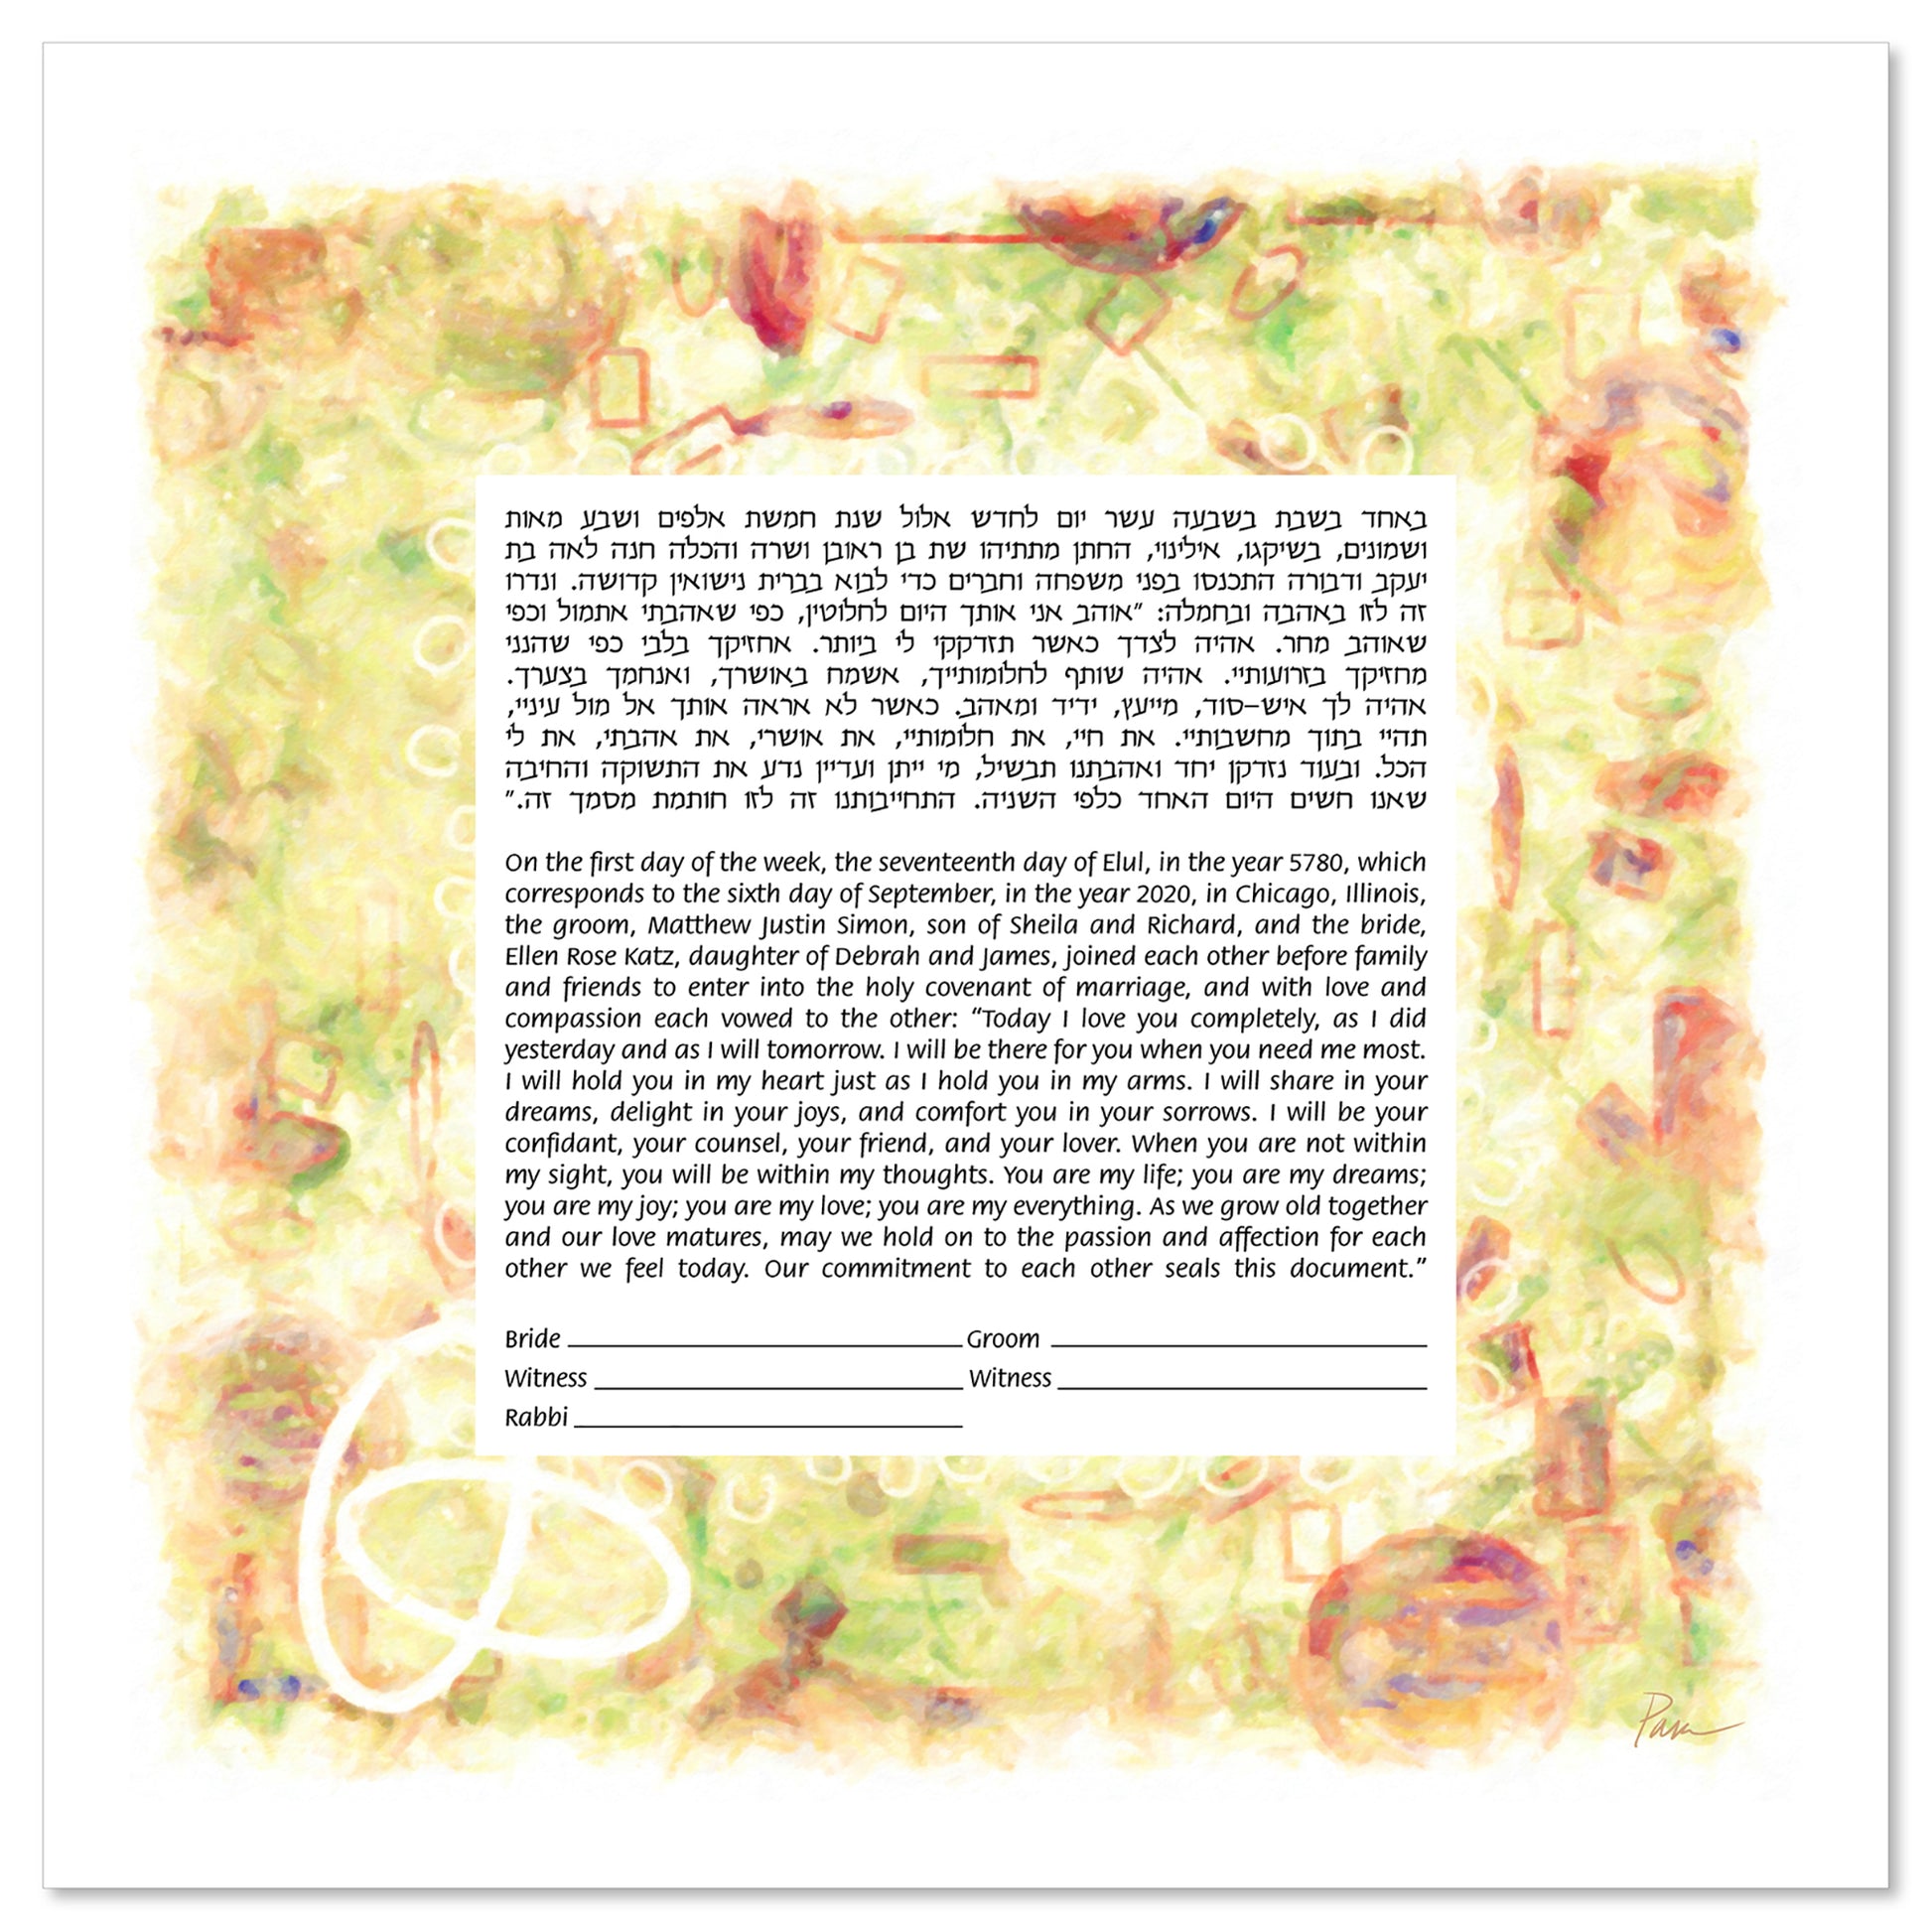 Galaxy Bands Warm ketubah by Pam Parker features a square text surrounded by mid-century modern shapes over a warm-colored background.